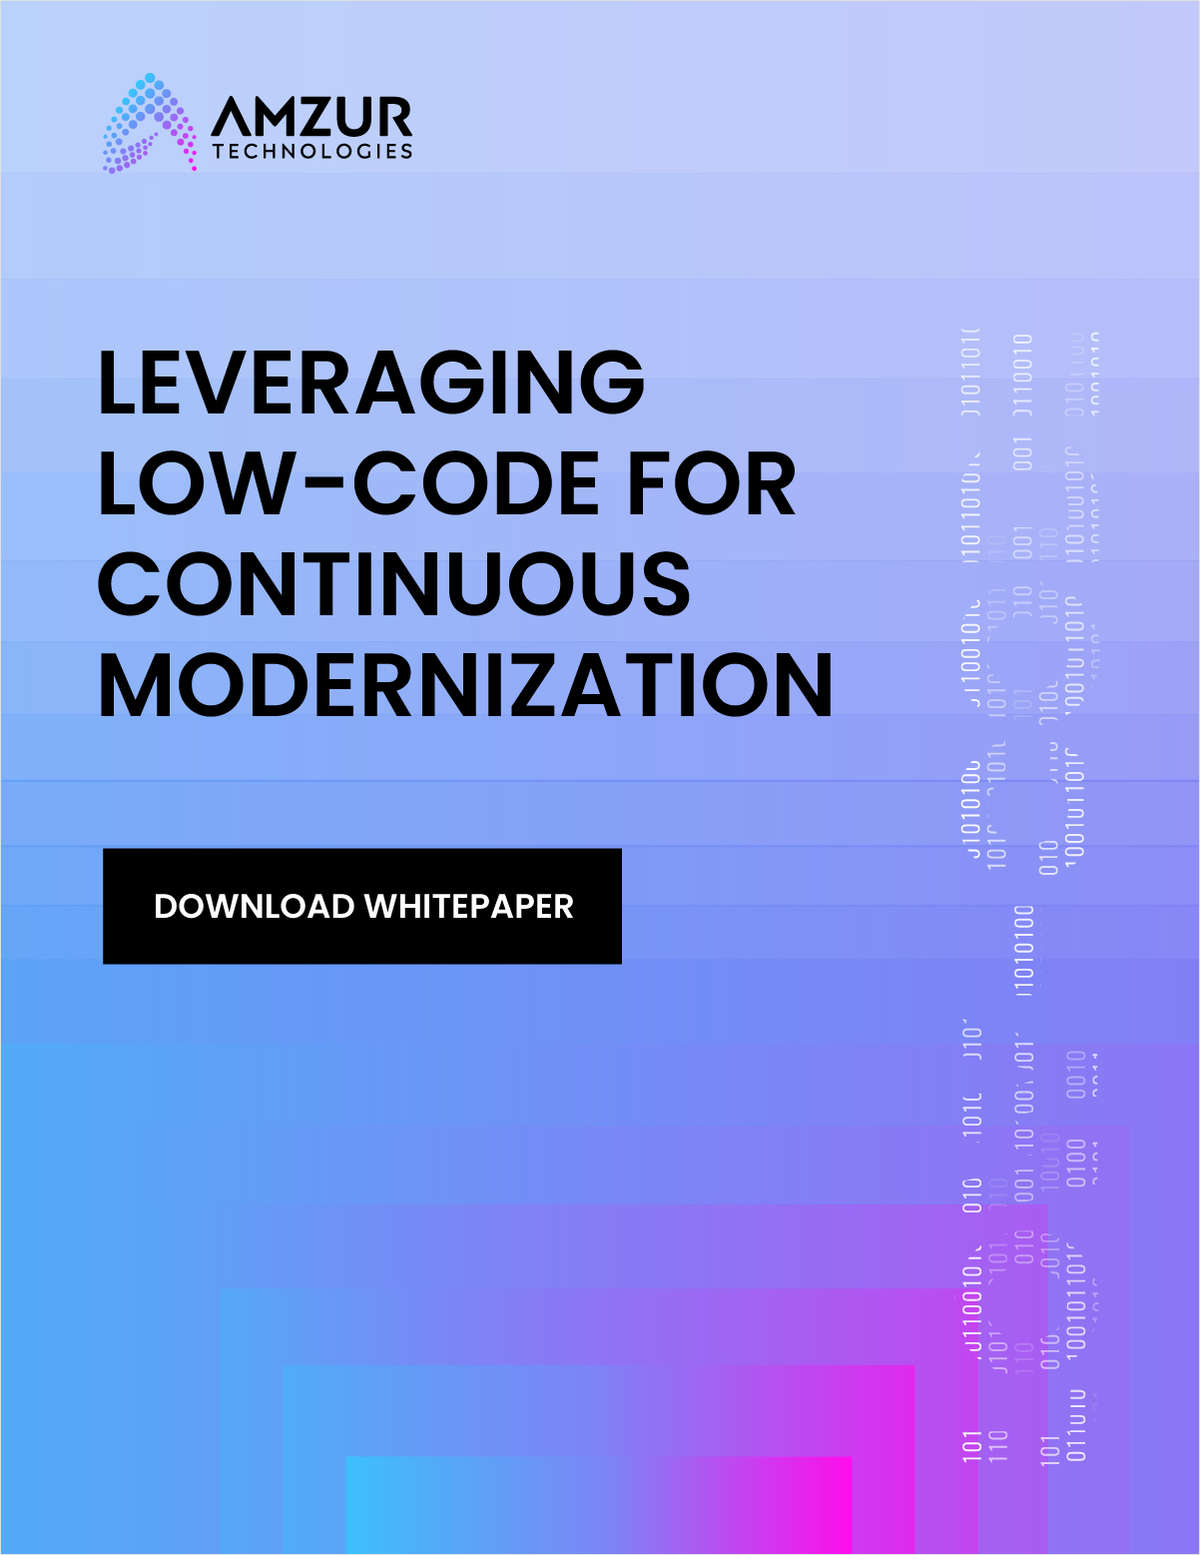 Accelerating Continuous Modernization with Low-Code